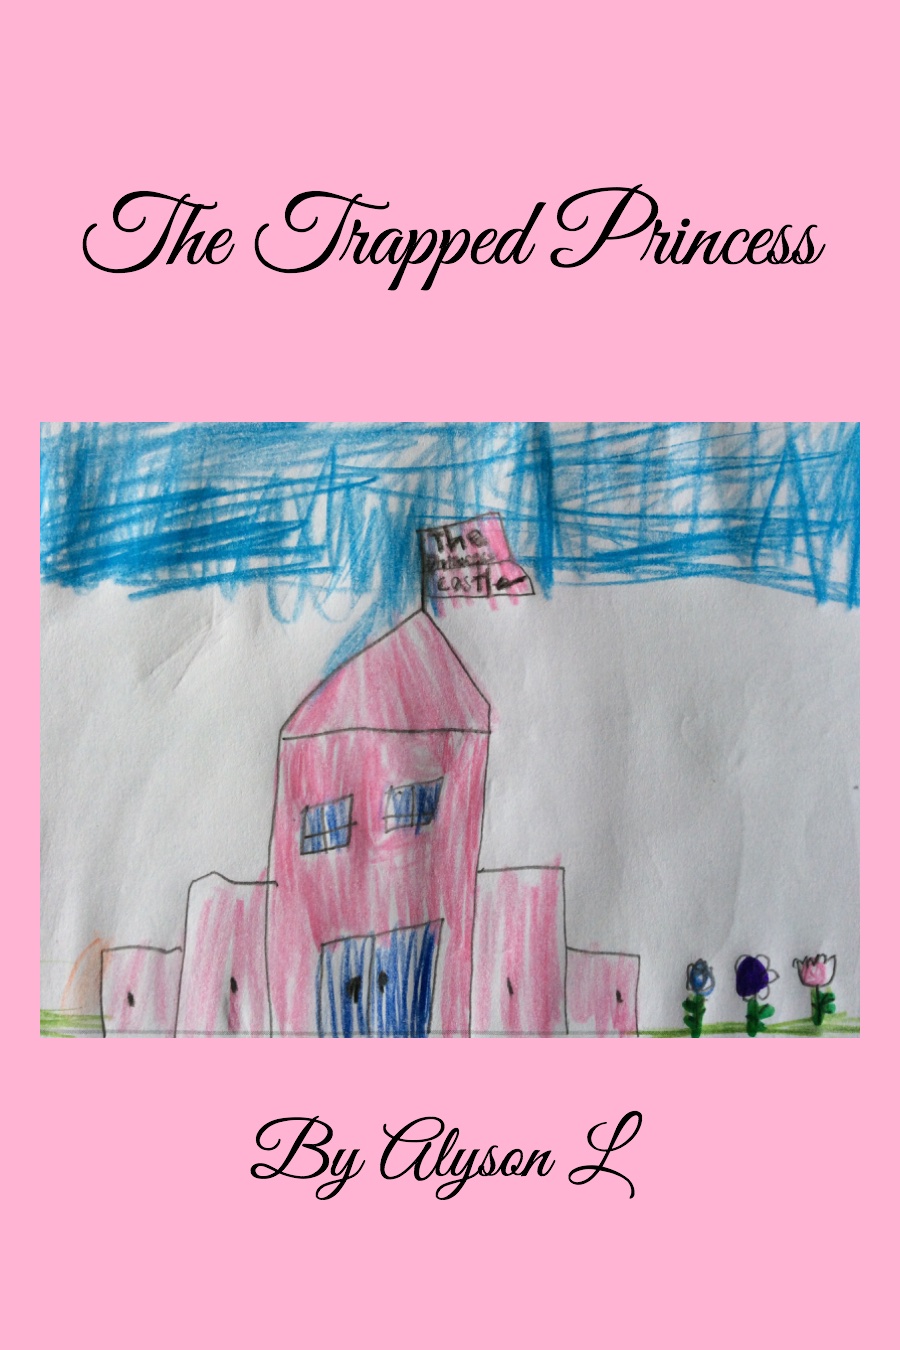 The Trapped Princess by Alyson L